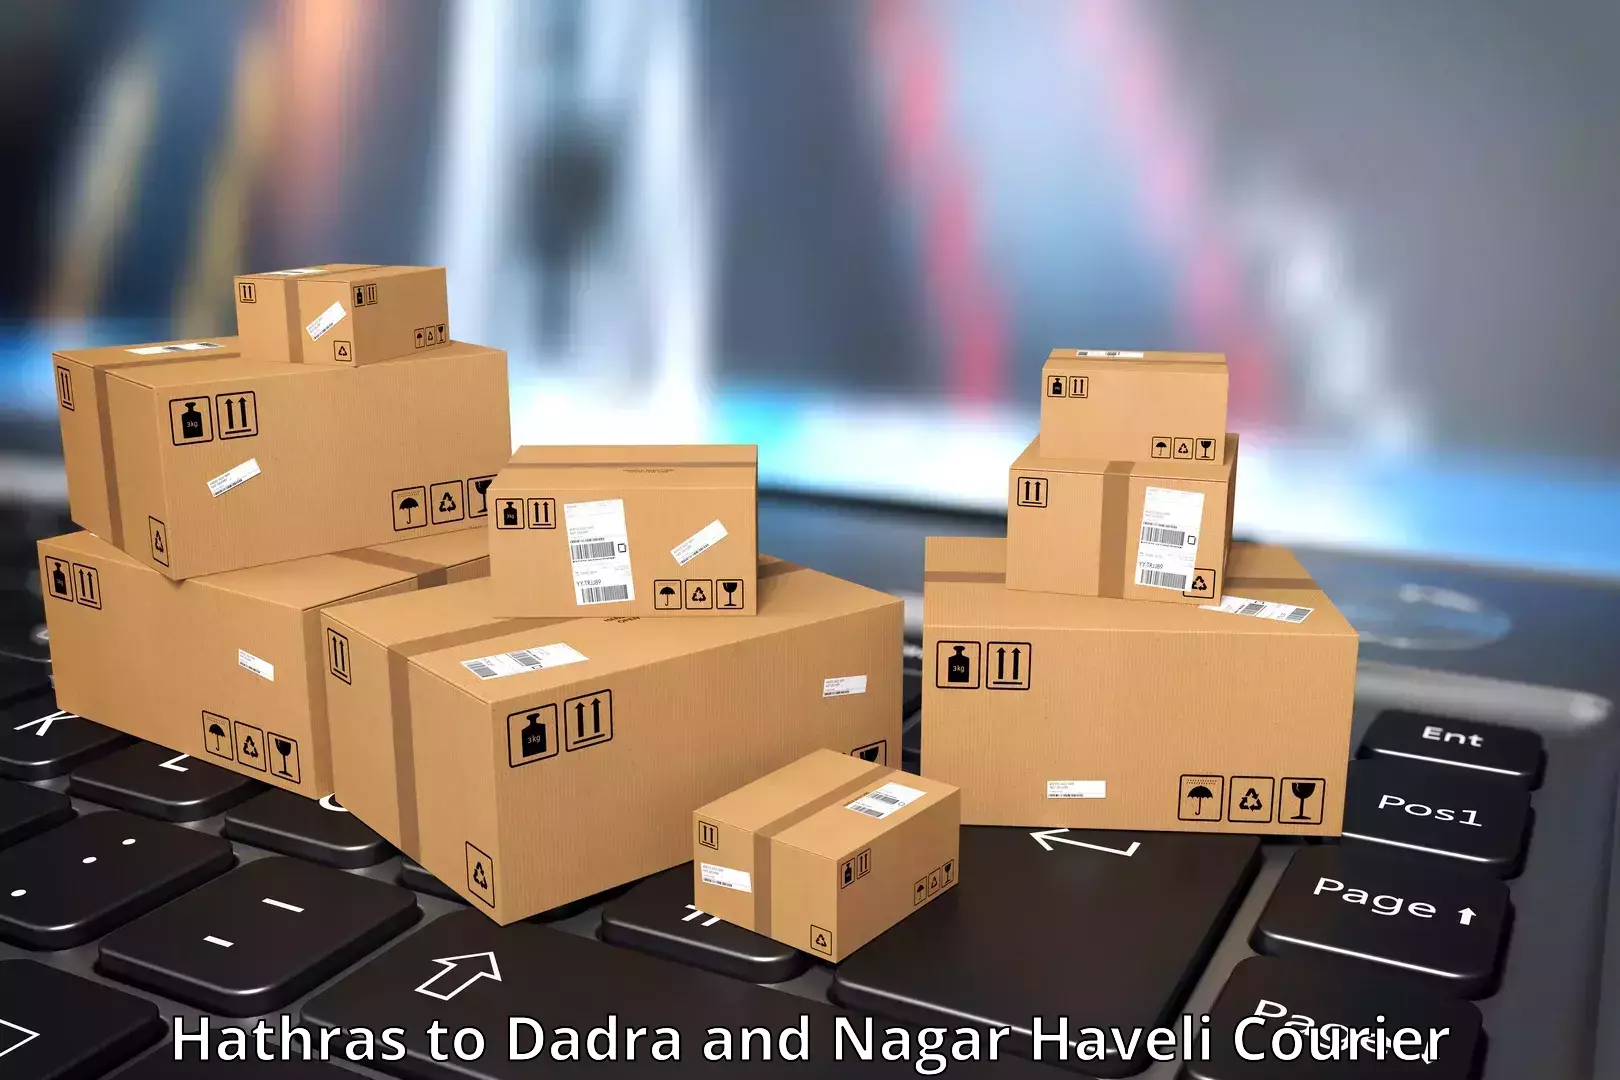 End-to-end delivery Hathras to Silvassa